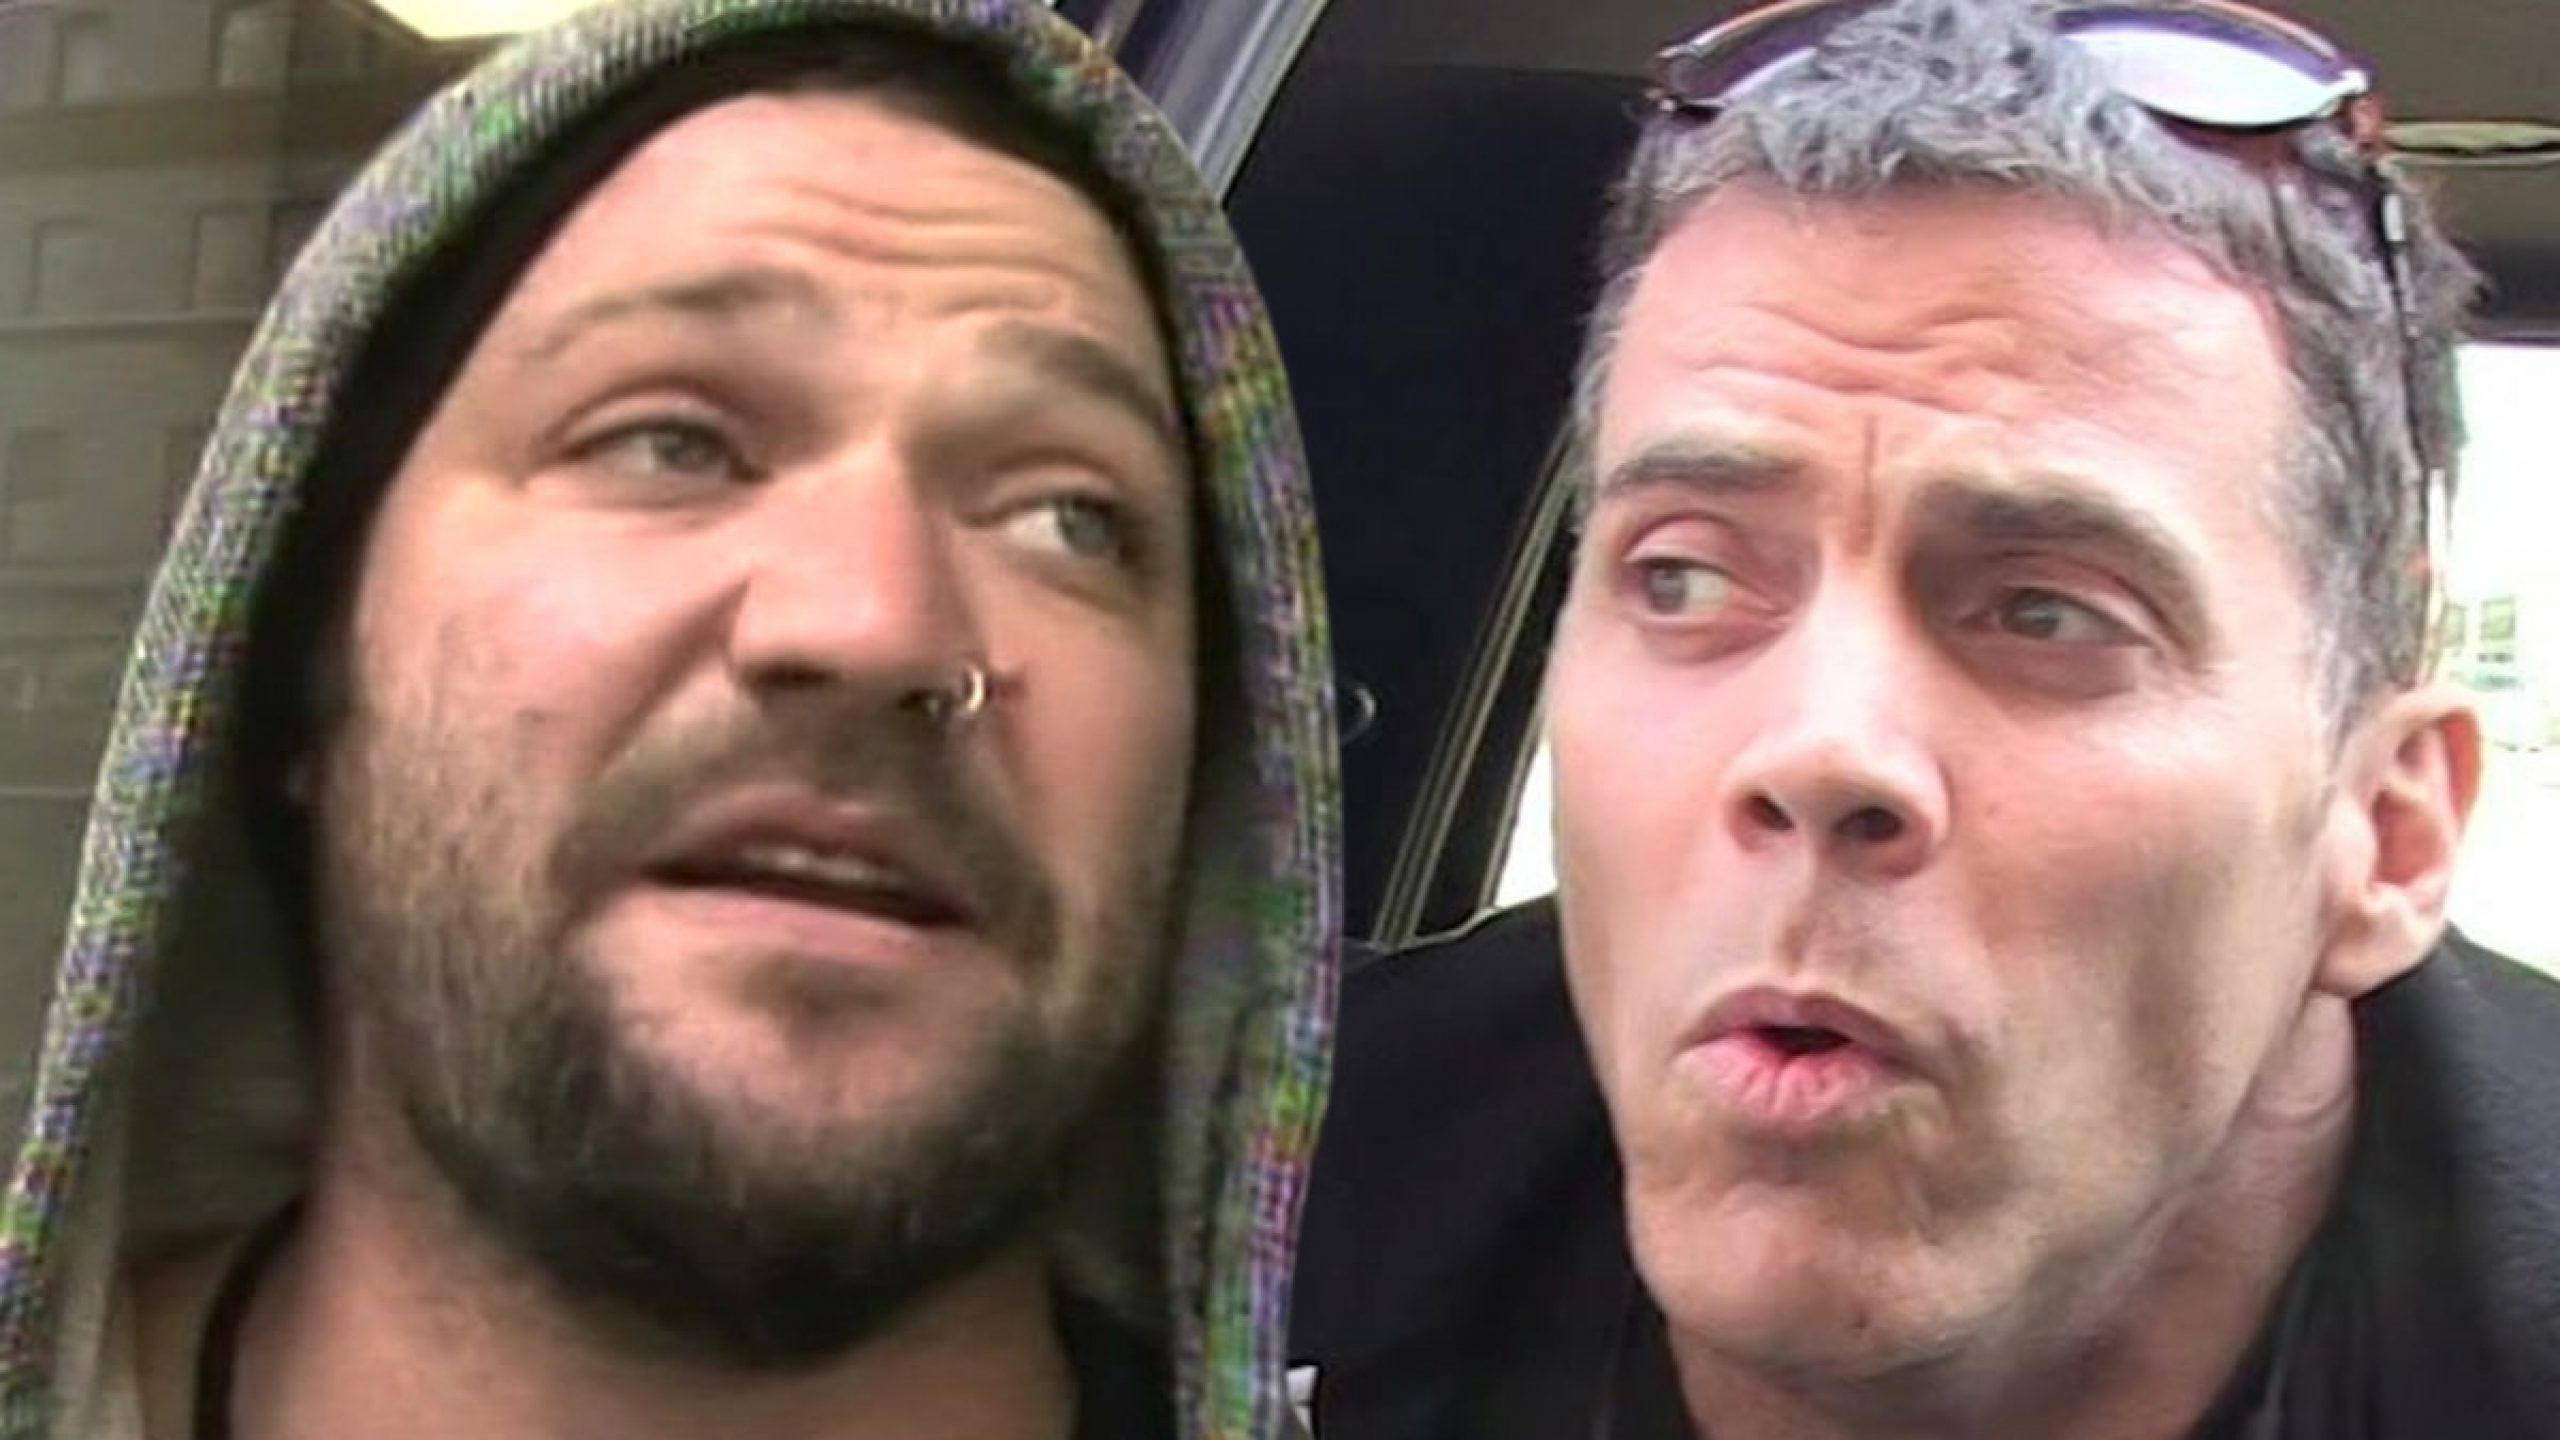 Bam Margera Rips ‘Jackass’ Crew, Steve-O Speaks Up and Defends Them